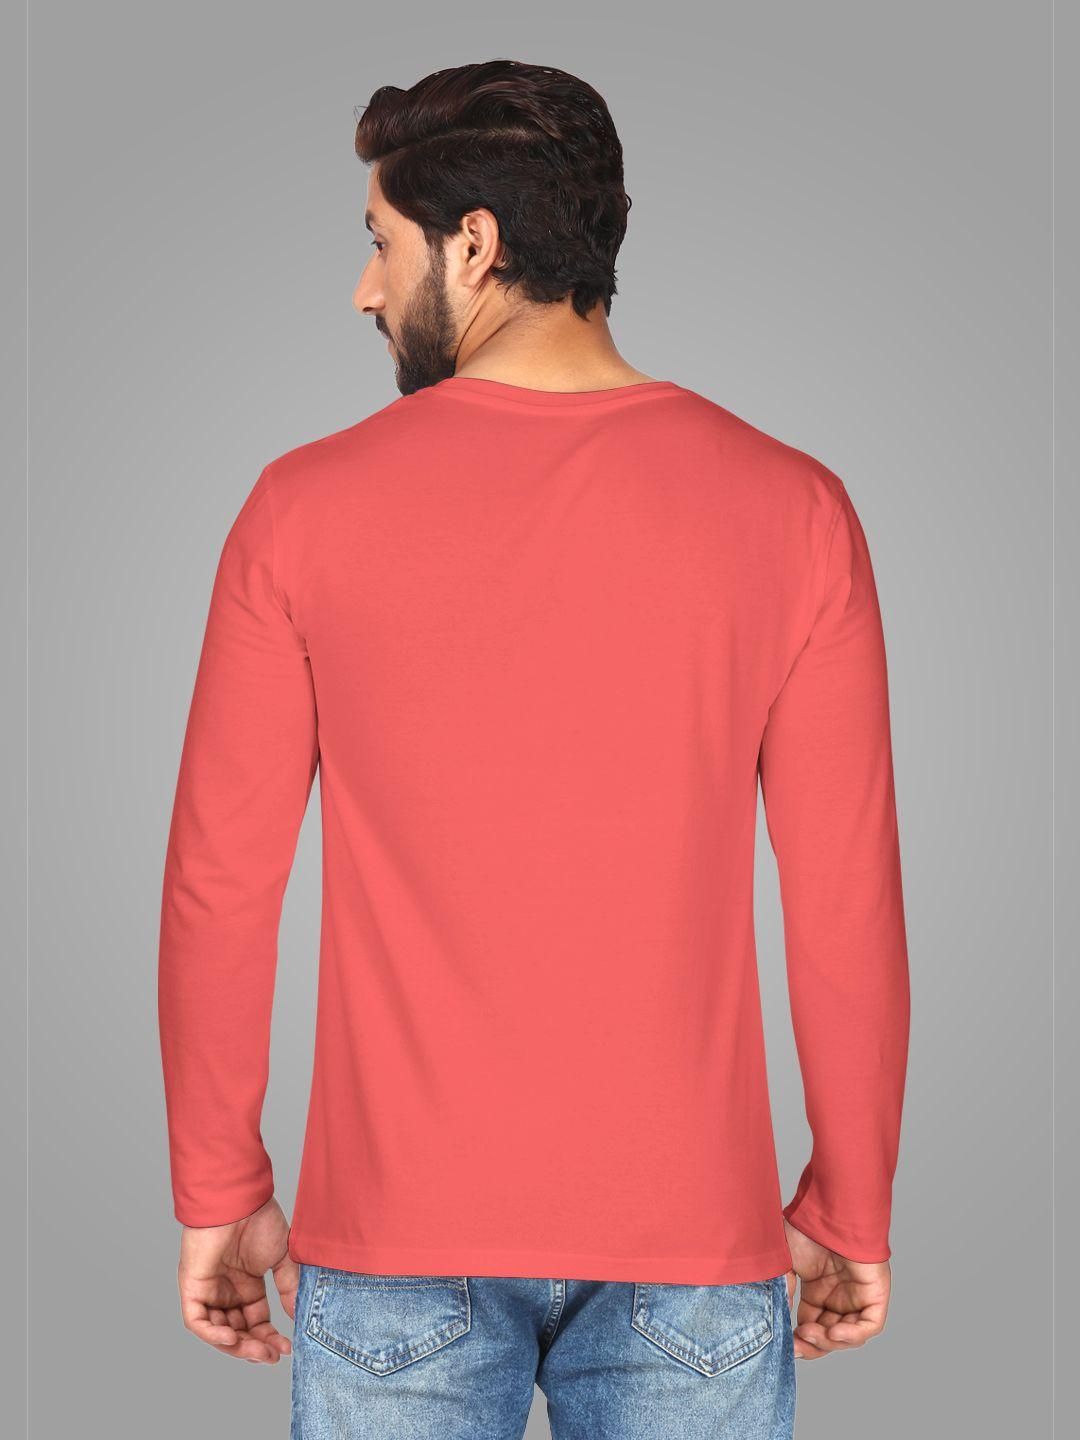 BULLMER Cotton Blend Solid Full Sleeves Mens Style Neck T-shirt